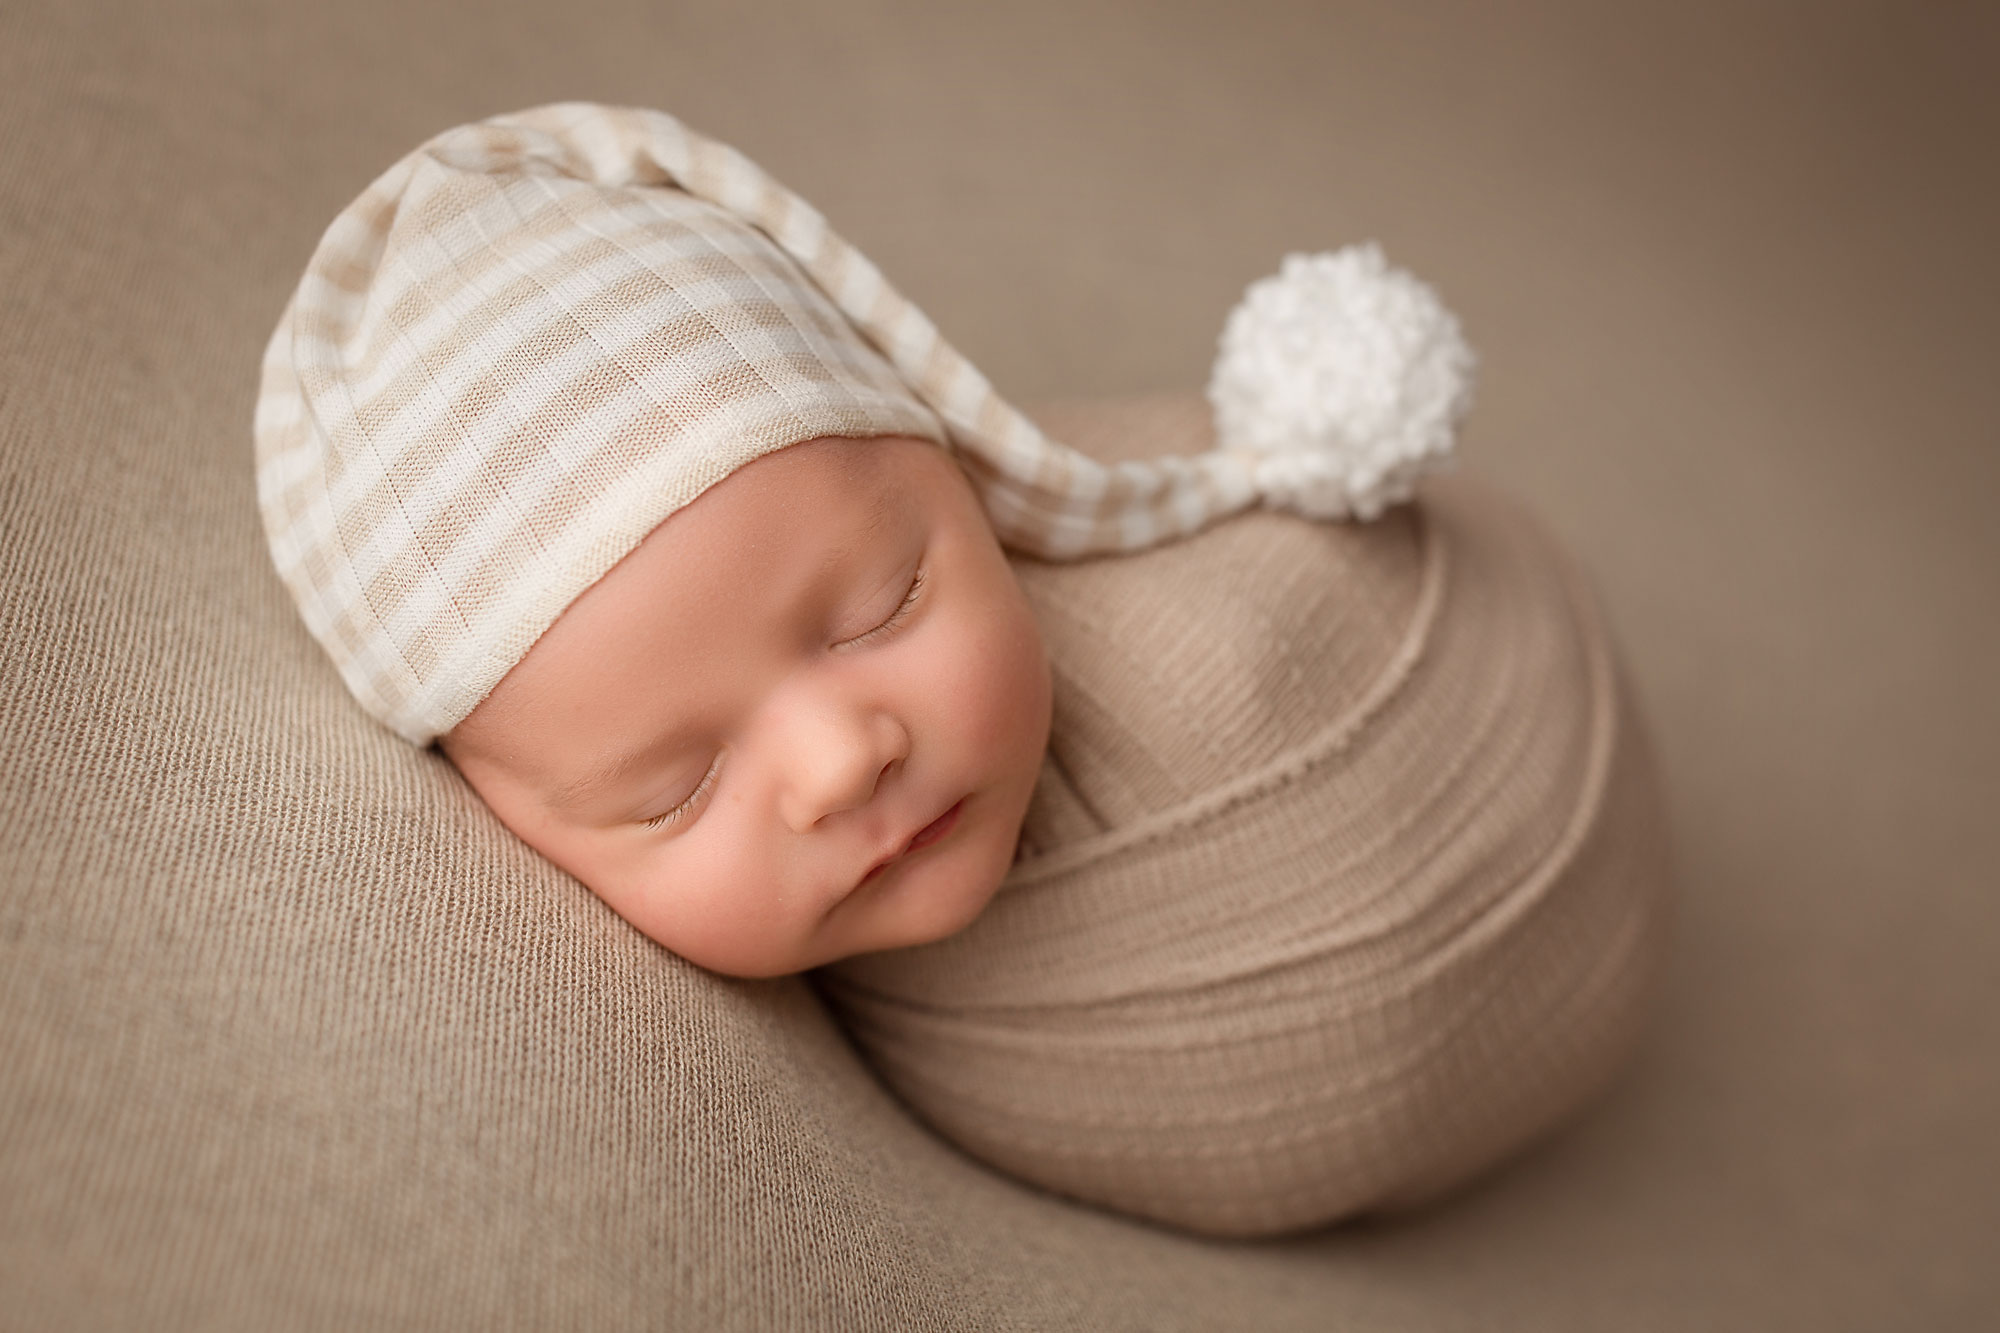 Learn how to photograph your own baby